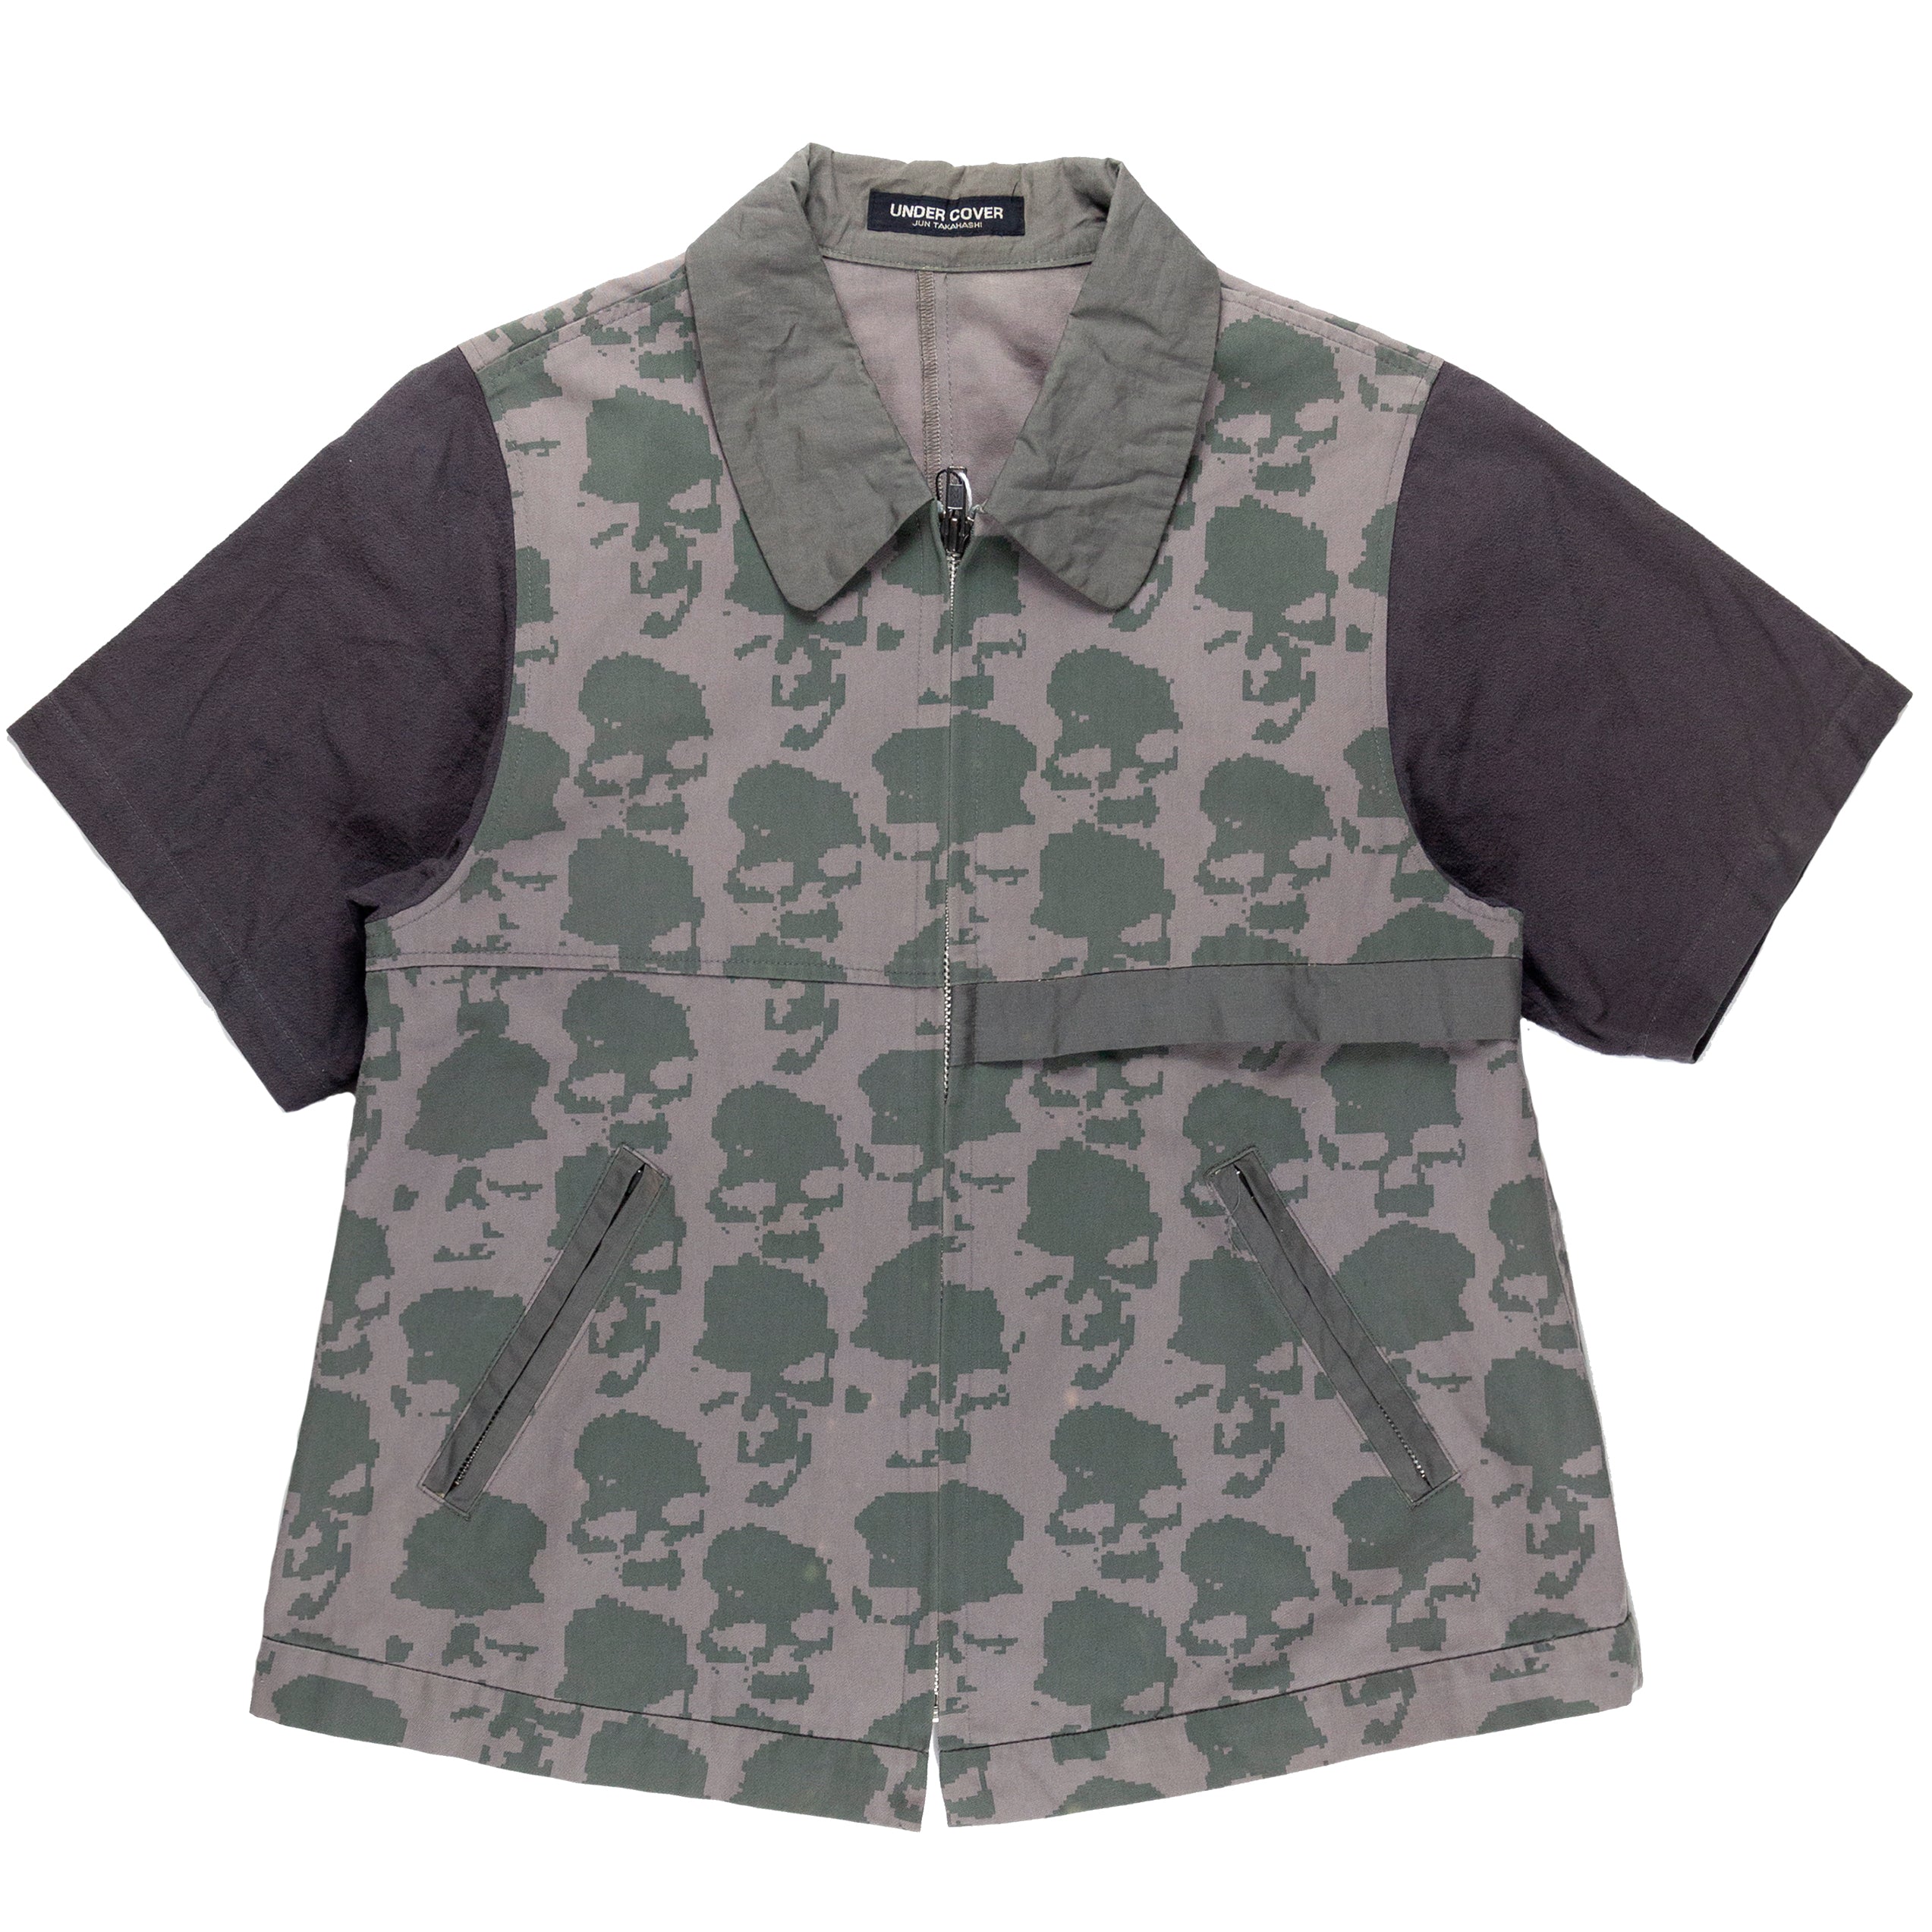 Undercover Skull Zip-Up Shirt - SS96 “Under The Cover”